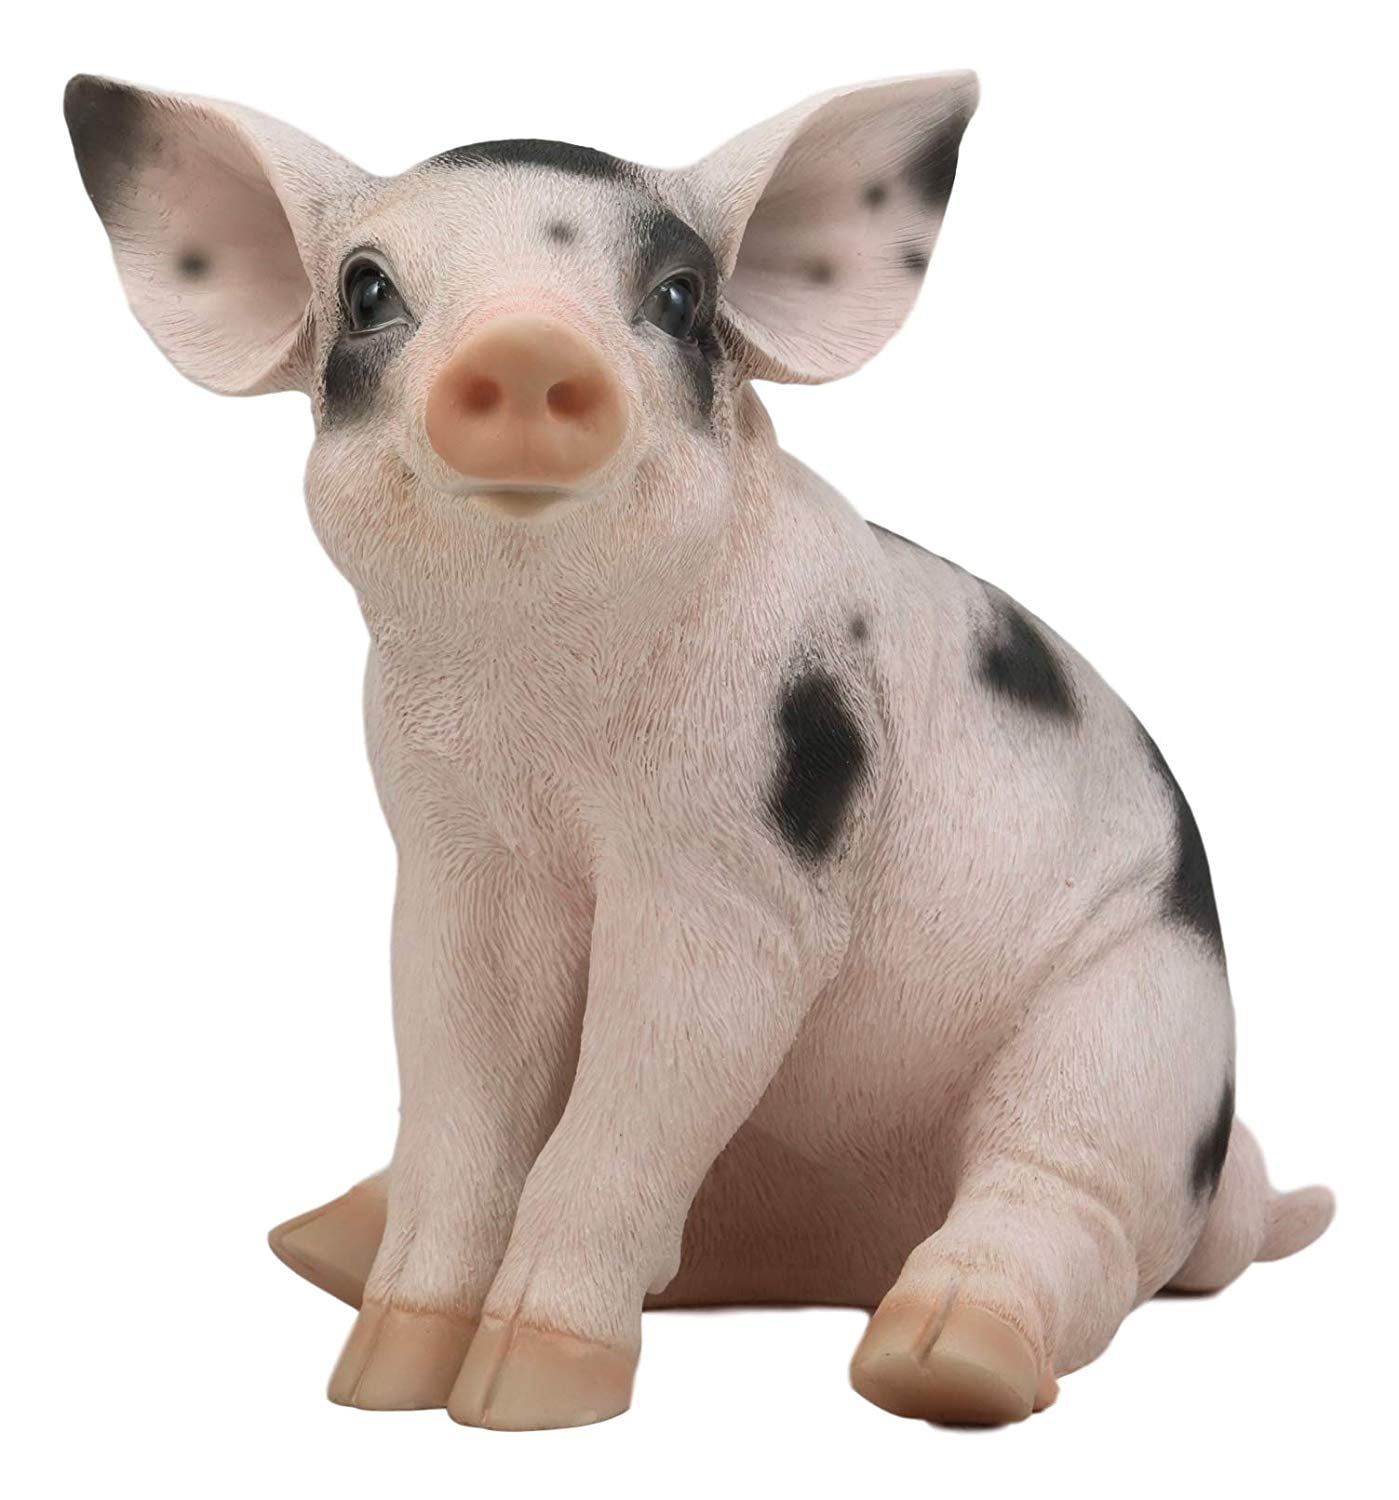 Garden Life Like Figurine Statue Home Standing Pig Large Cute Adorable 